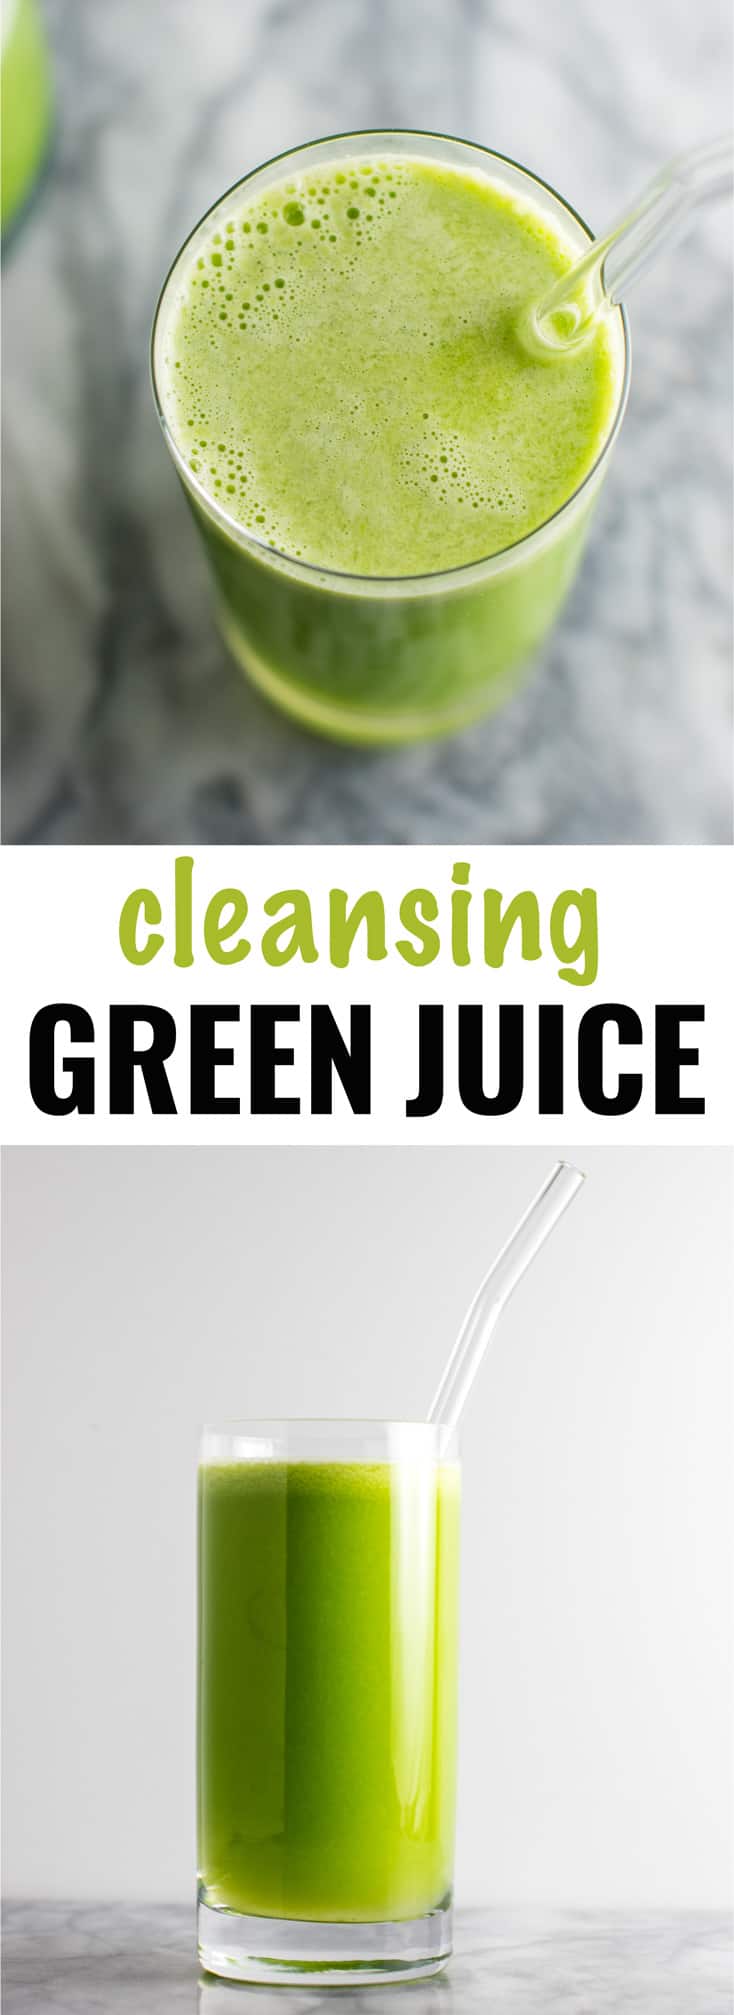 image with text "cleansing green juice"